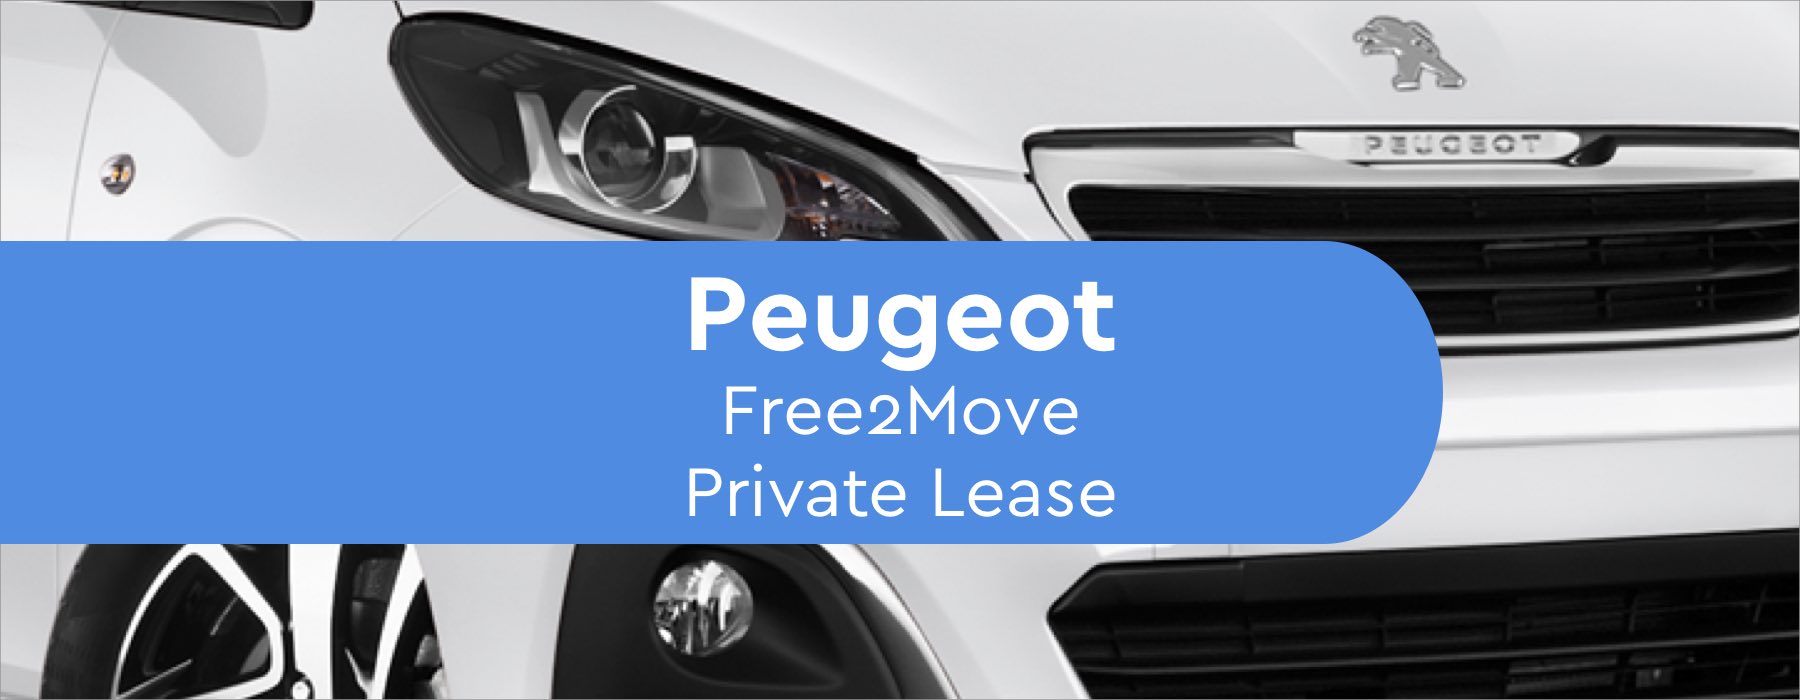 peugeot free2move Private Lease